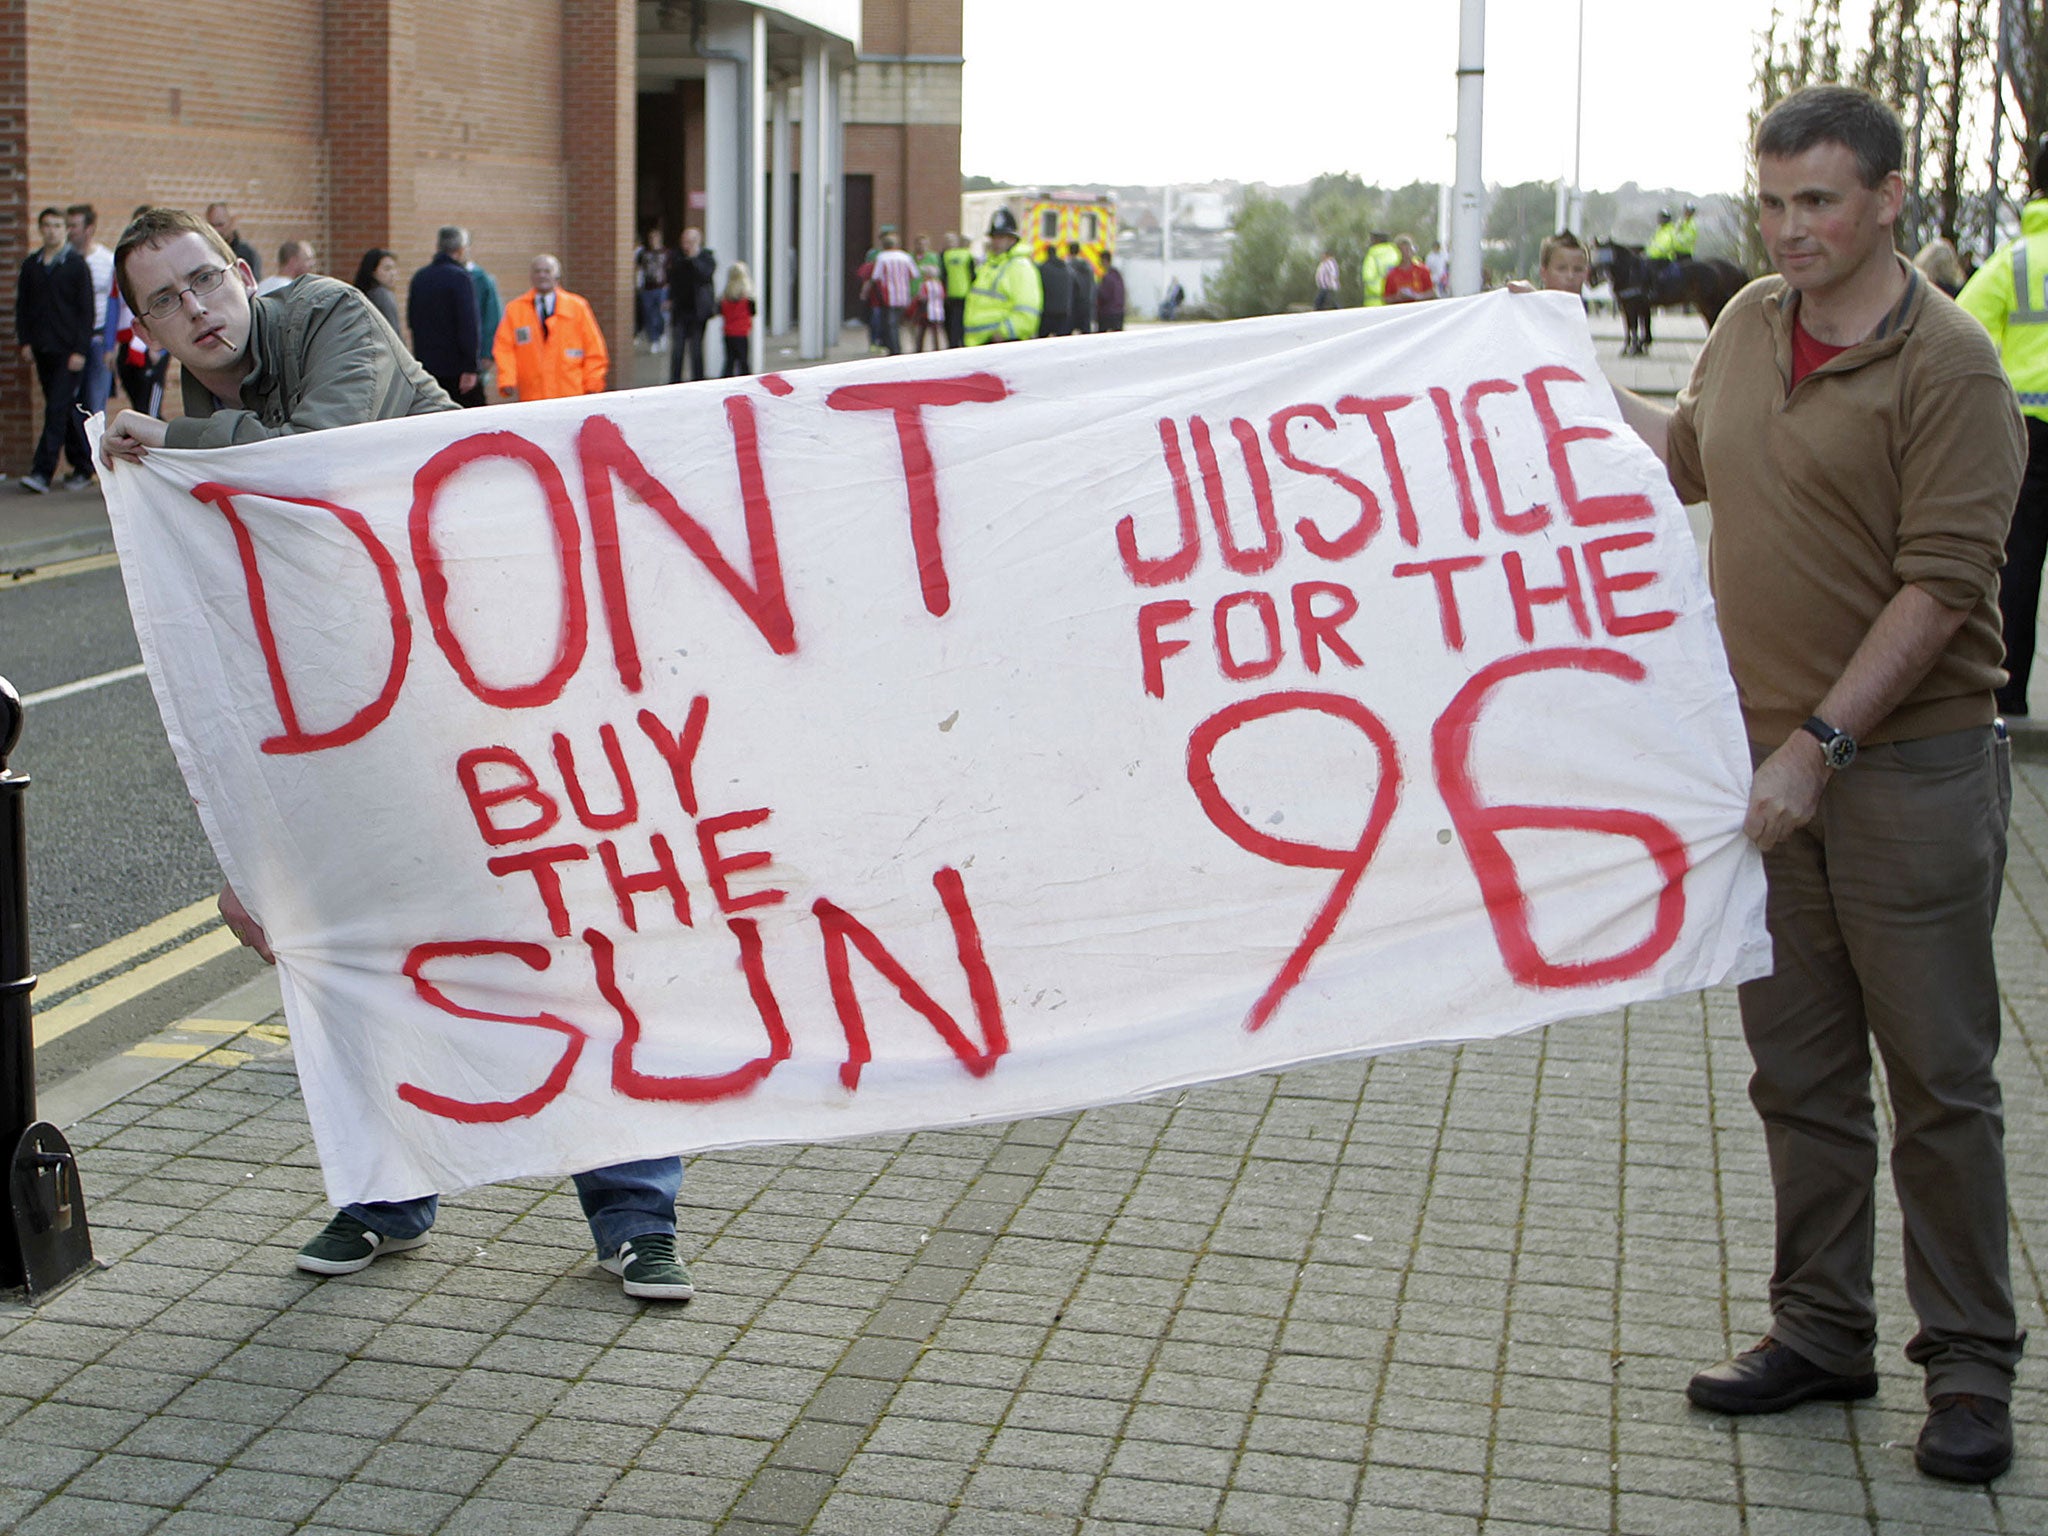 Liverpool fans have boycotted The Sun following the coverage of the Hillsborough disaster